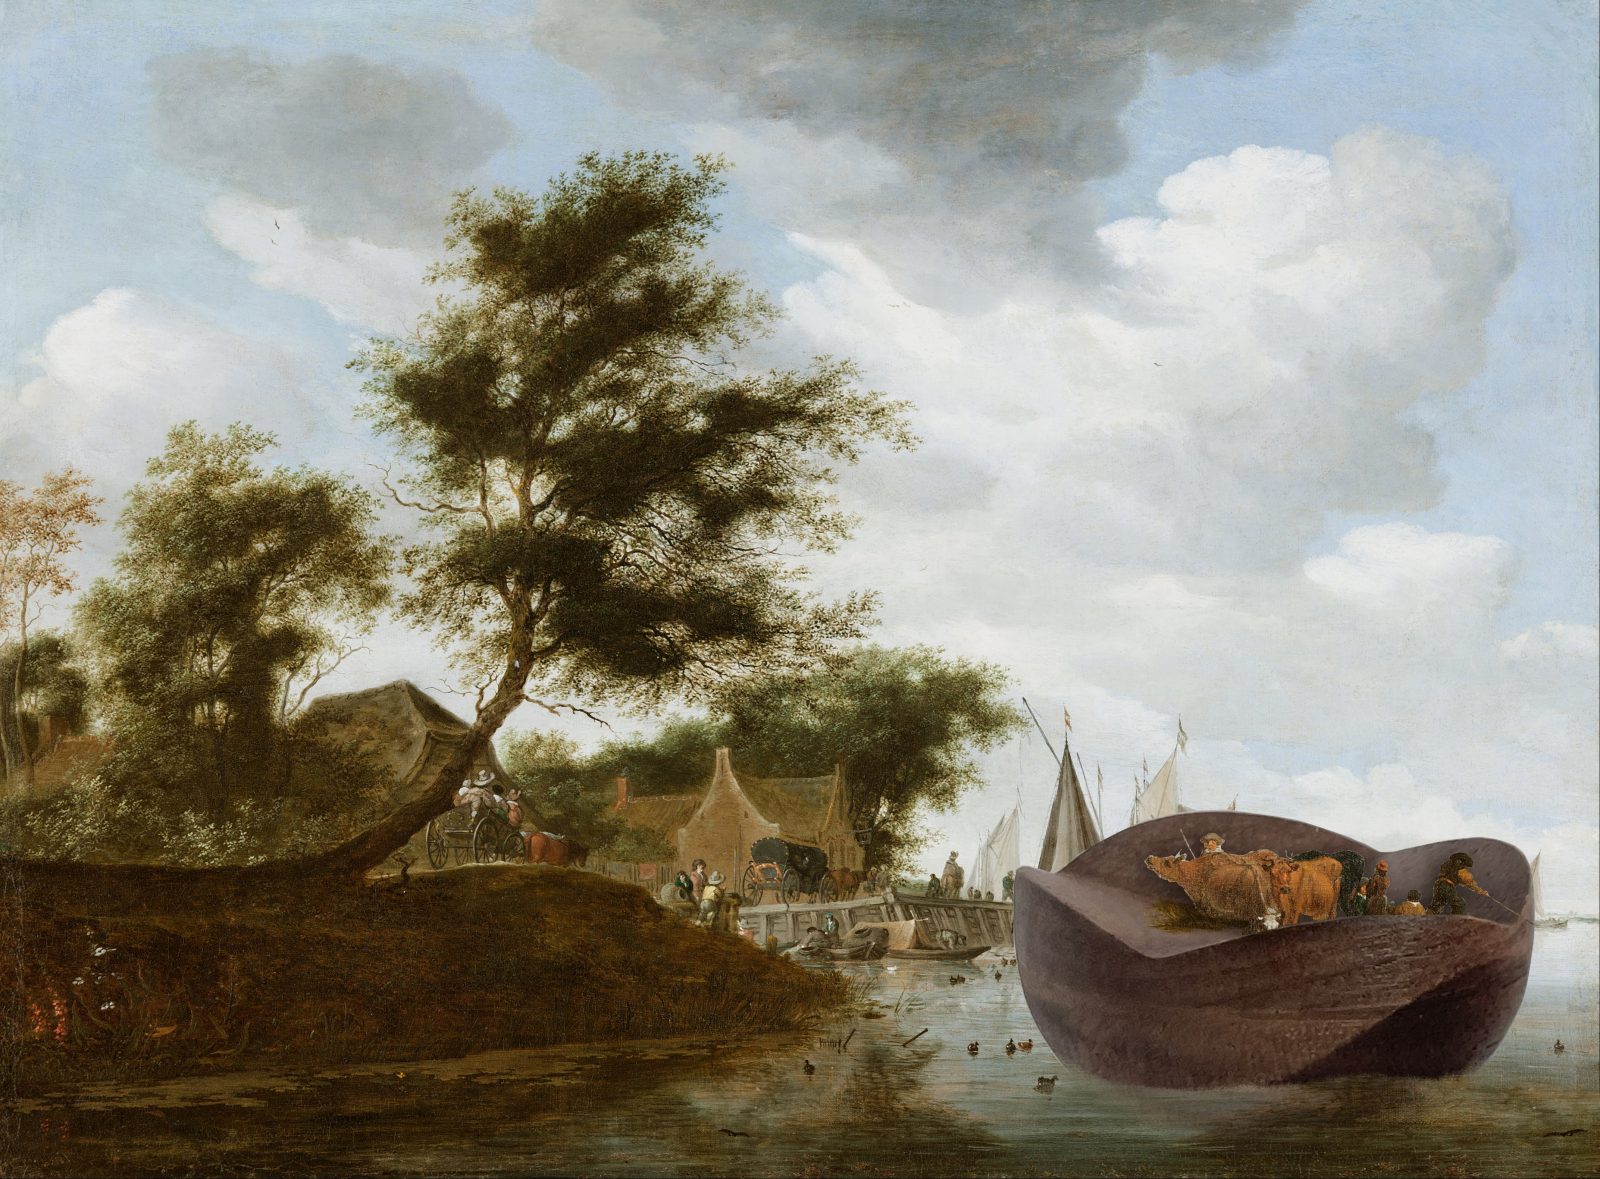 Collage with ark and the reproduction of the painting "River Landscape with a Ferry" by Salomon van Ruysdael, 1649